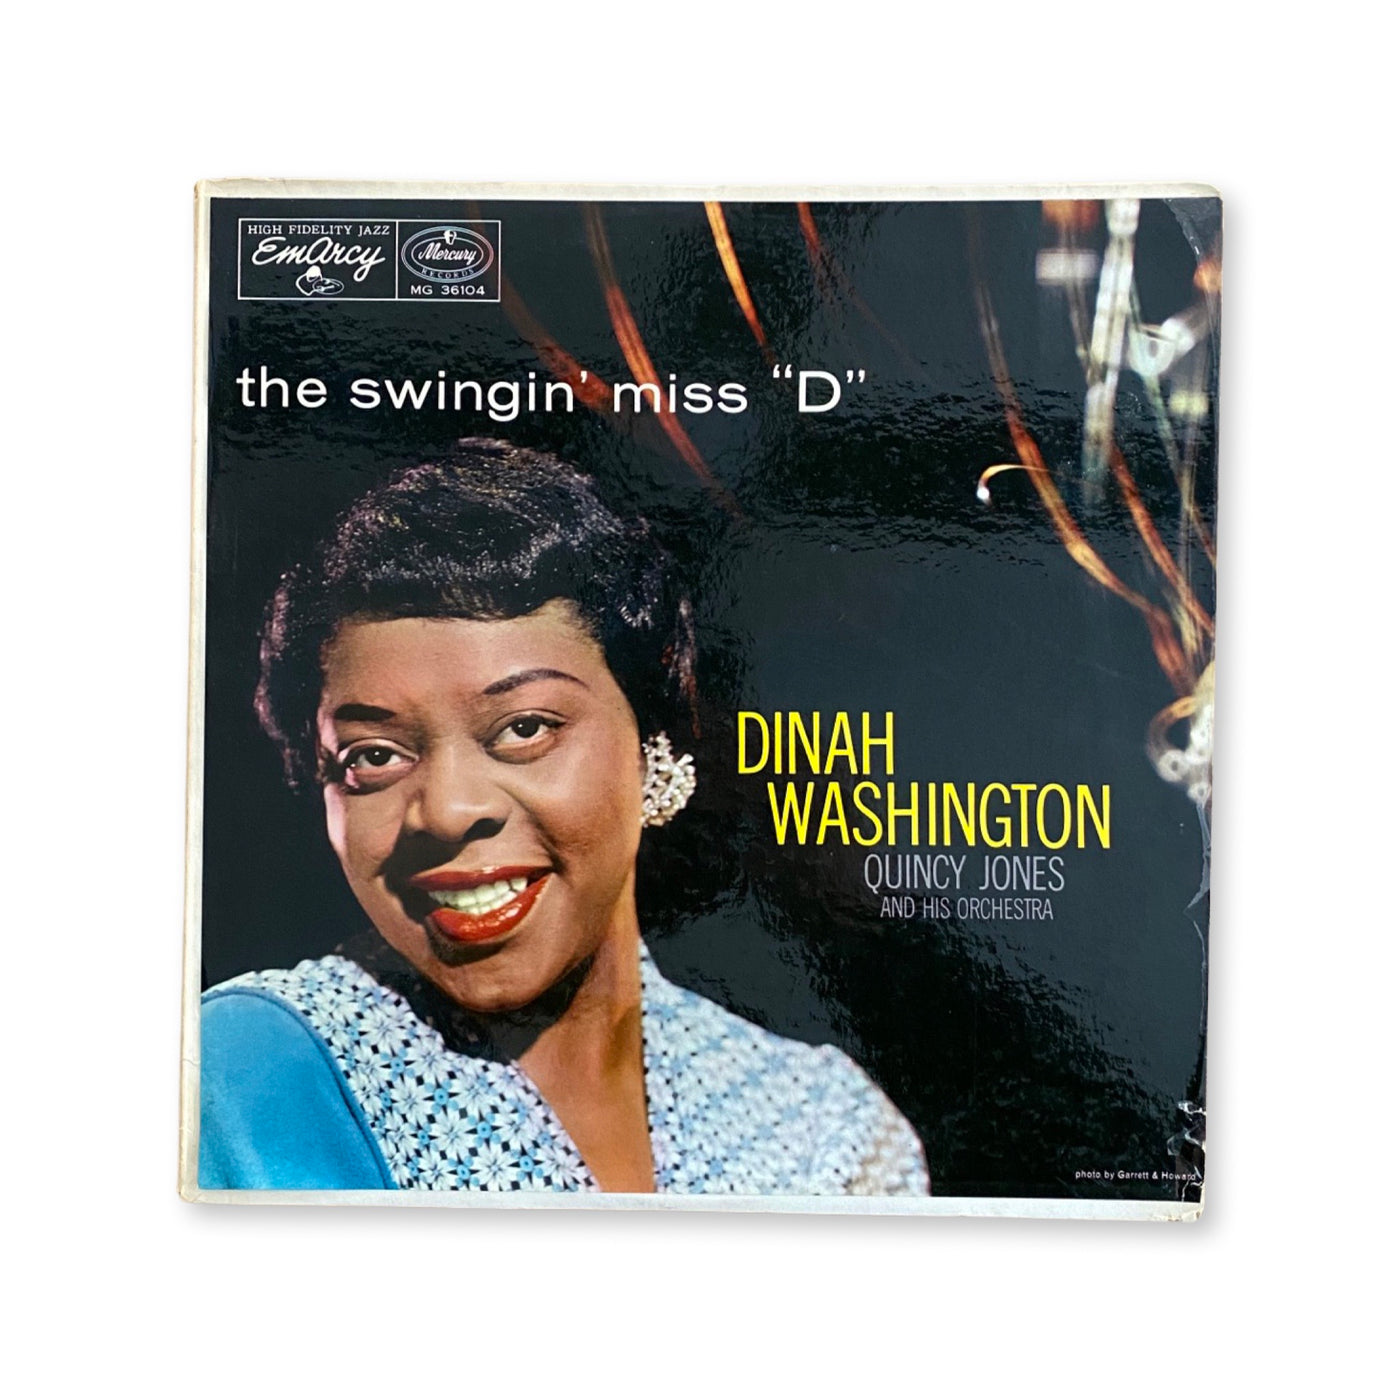 Dinah Washington With Quincy Jones And His Orchestra - The Swingin' Miss "D"